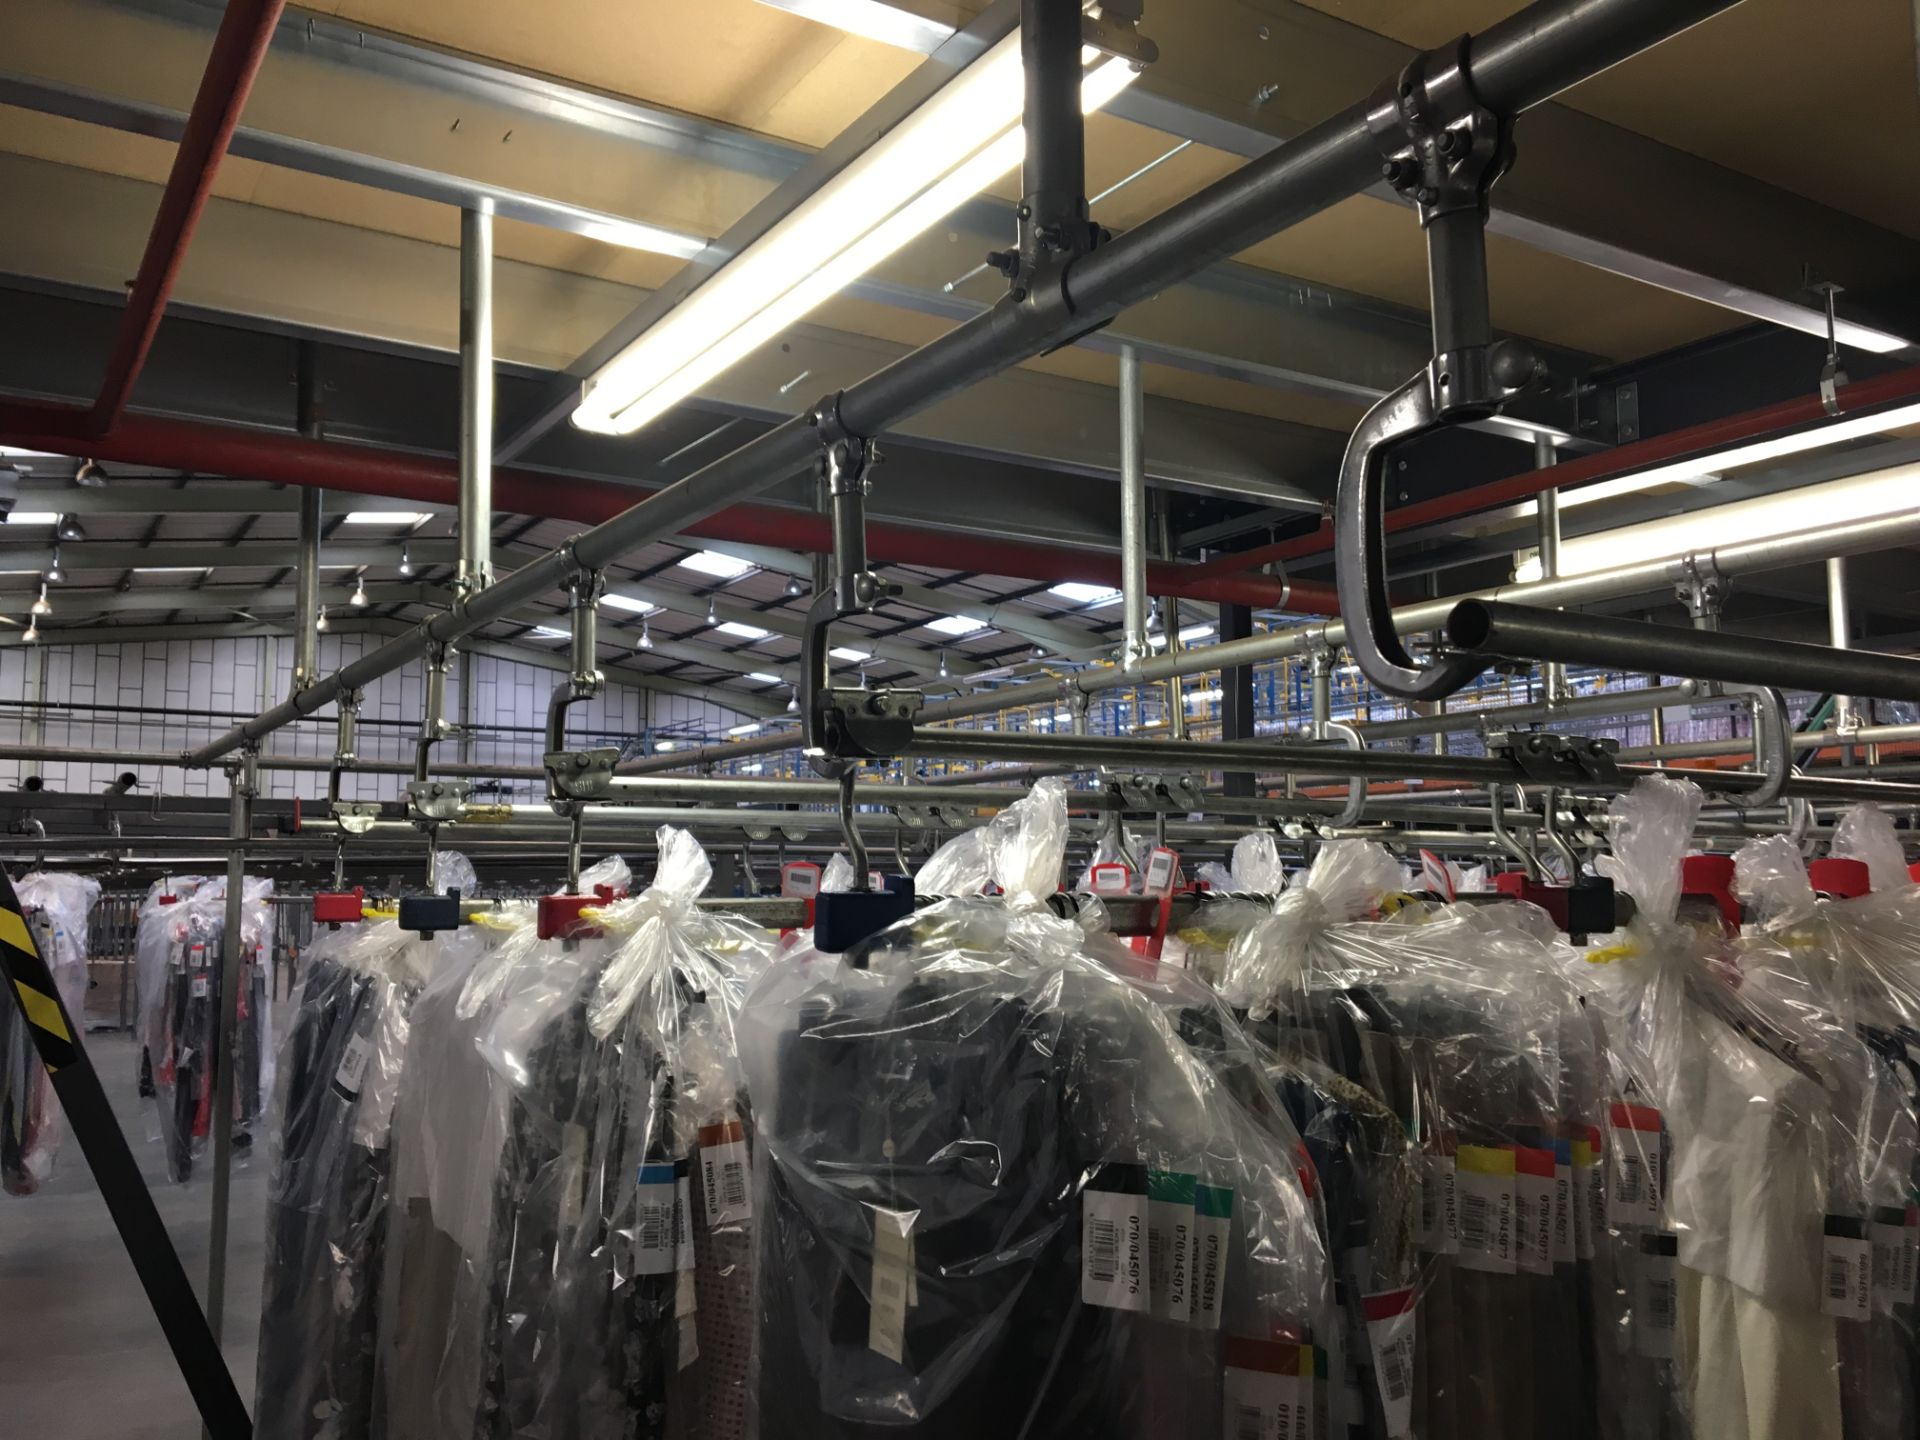 Overhead Garment Handling Conveyor System (thoughout premises) - Image 20 of 21